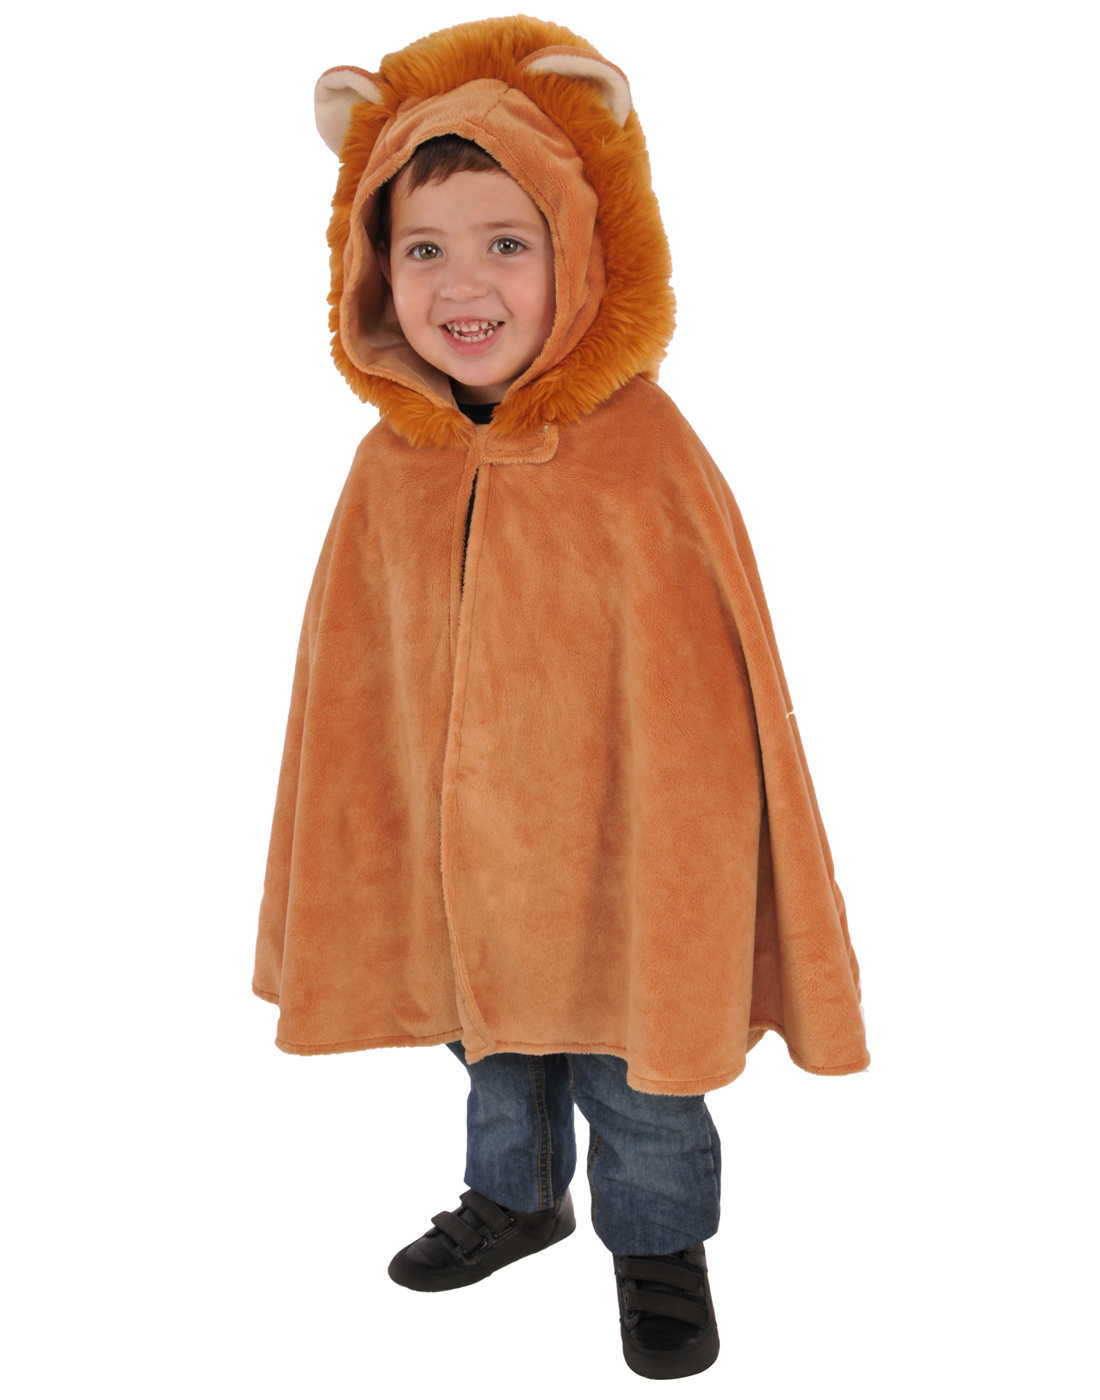 Lion Child Toddler Hooded Circus Animal Costume Cape Cloak Mantle - image 1 of 2